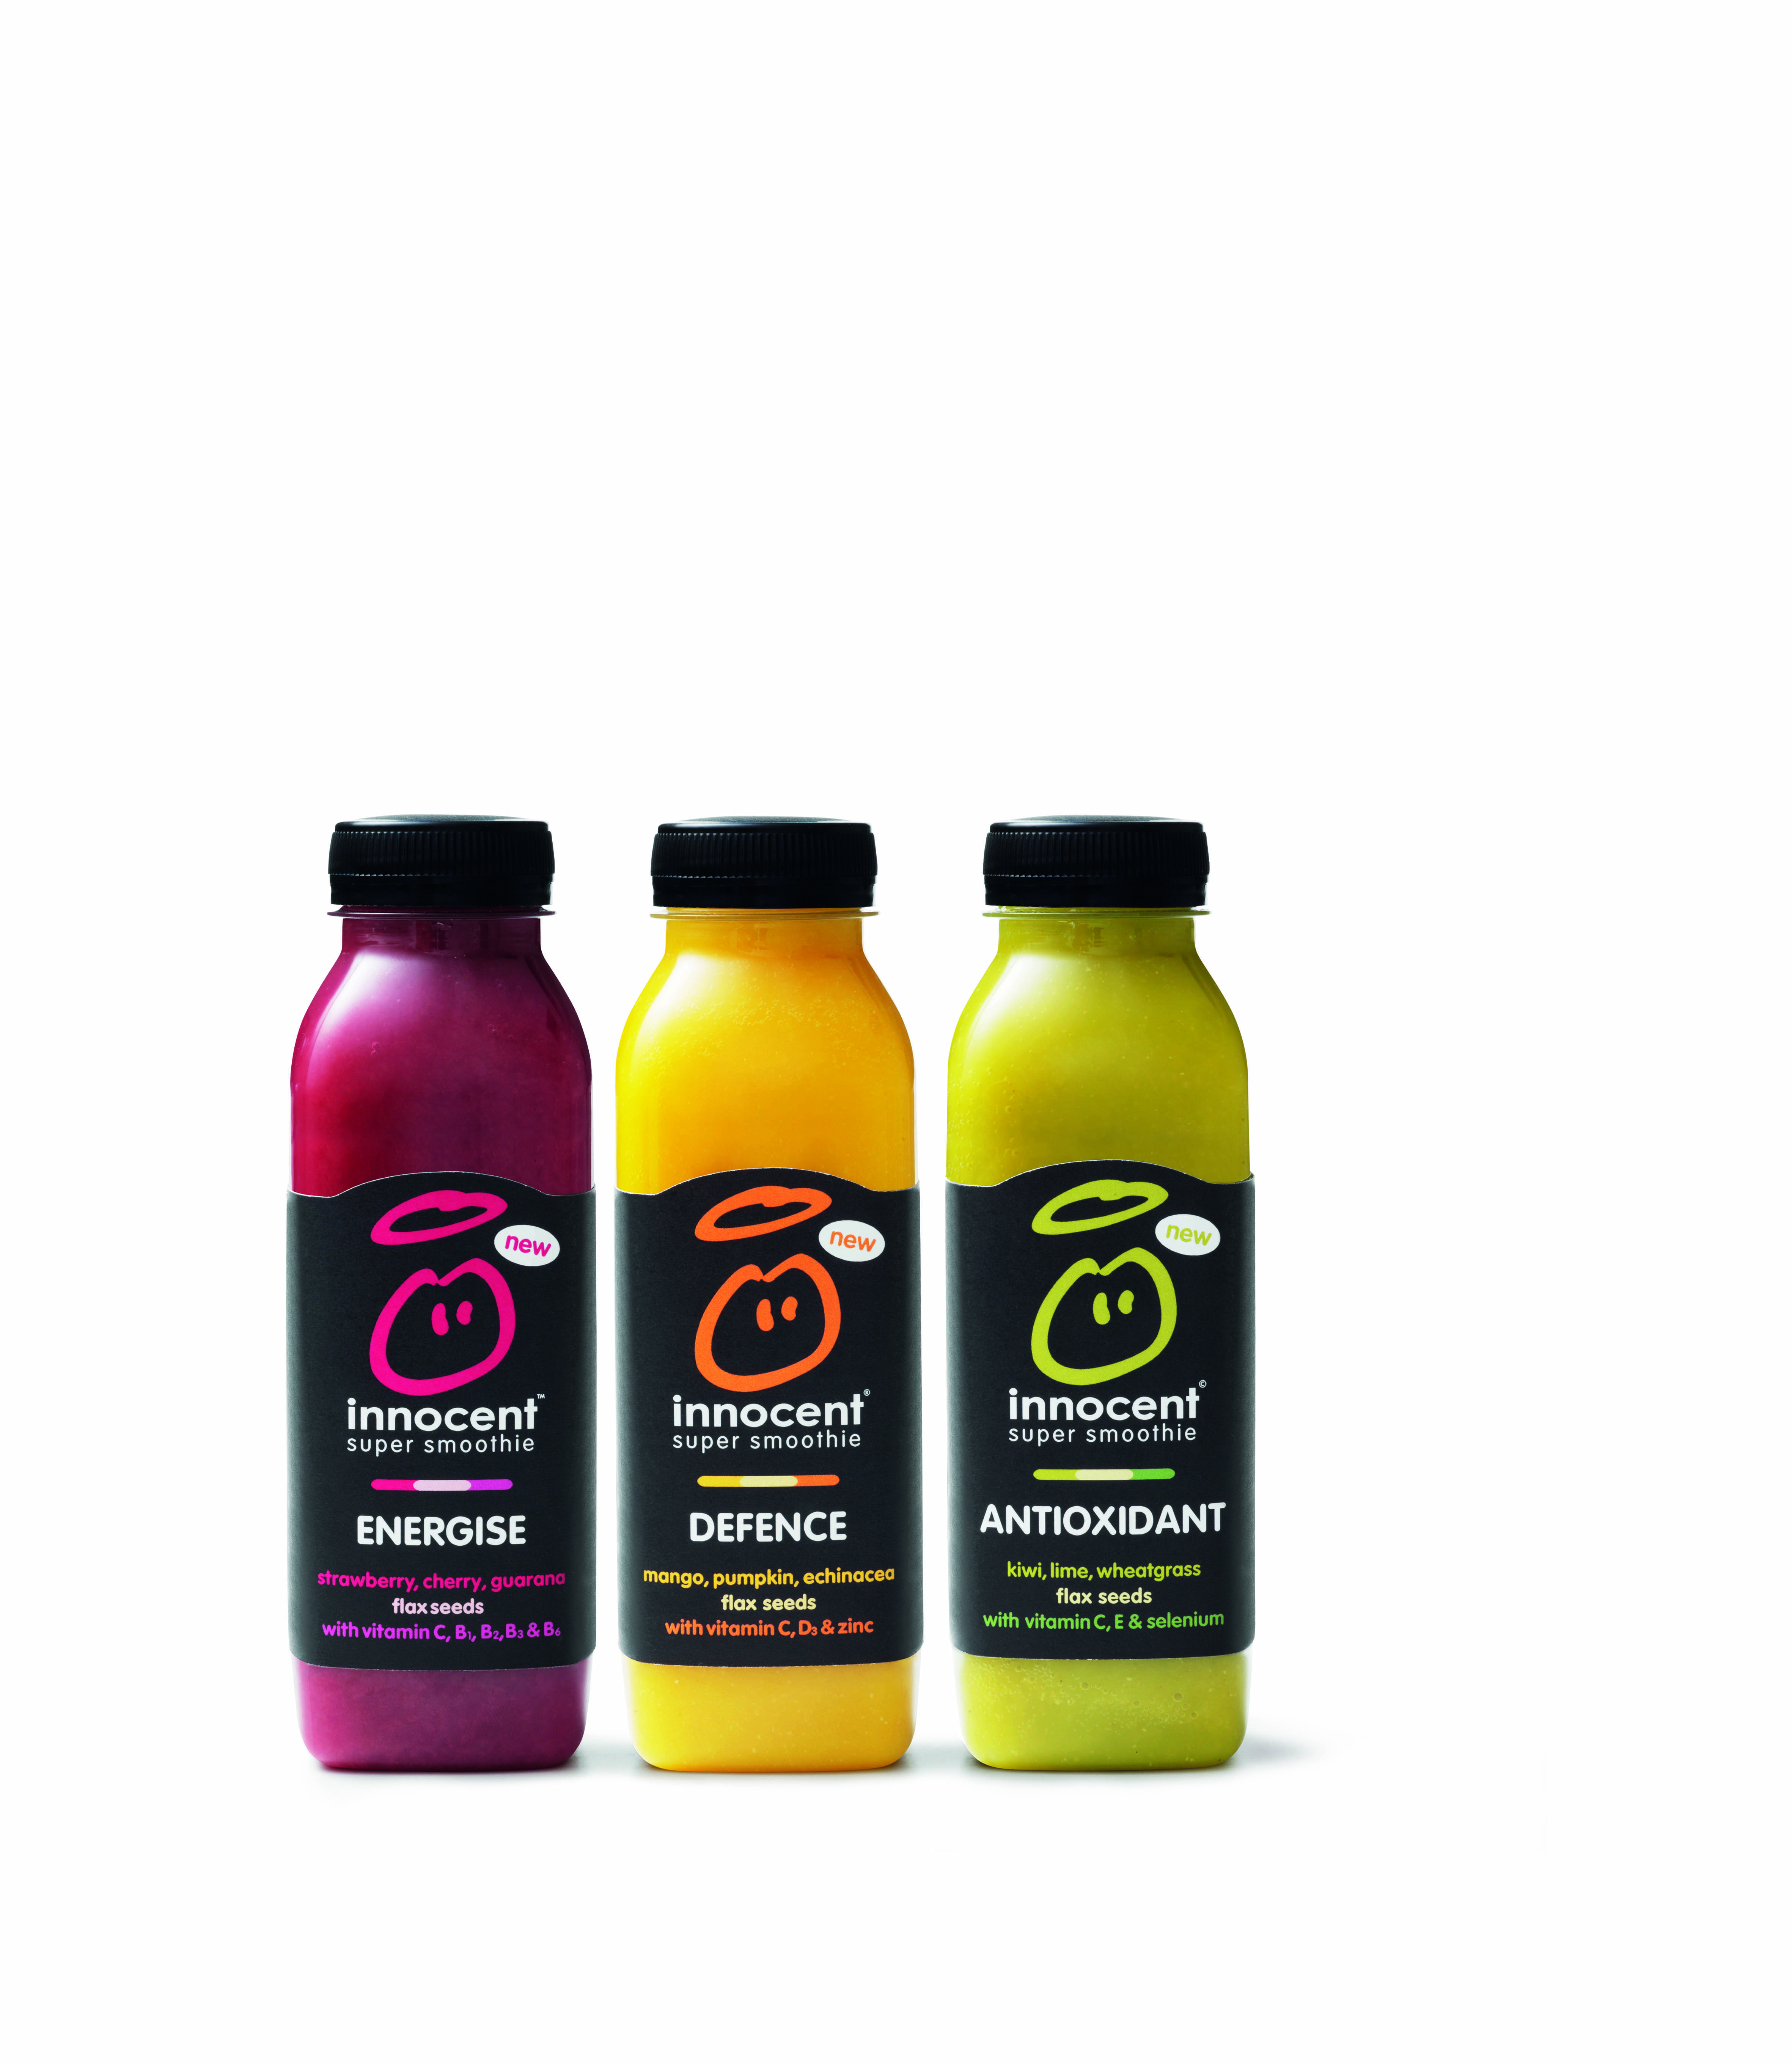 Innocent Super Smoothies: They're, erm, super but watch the sugar ...